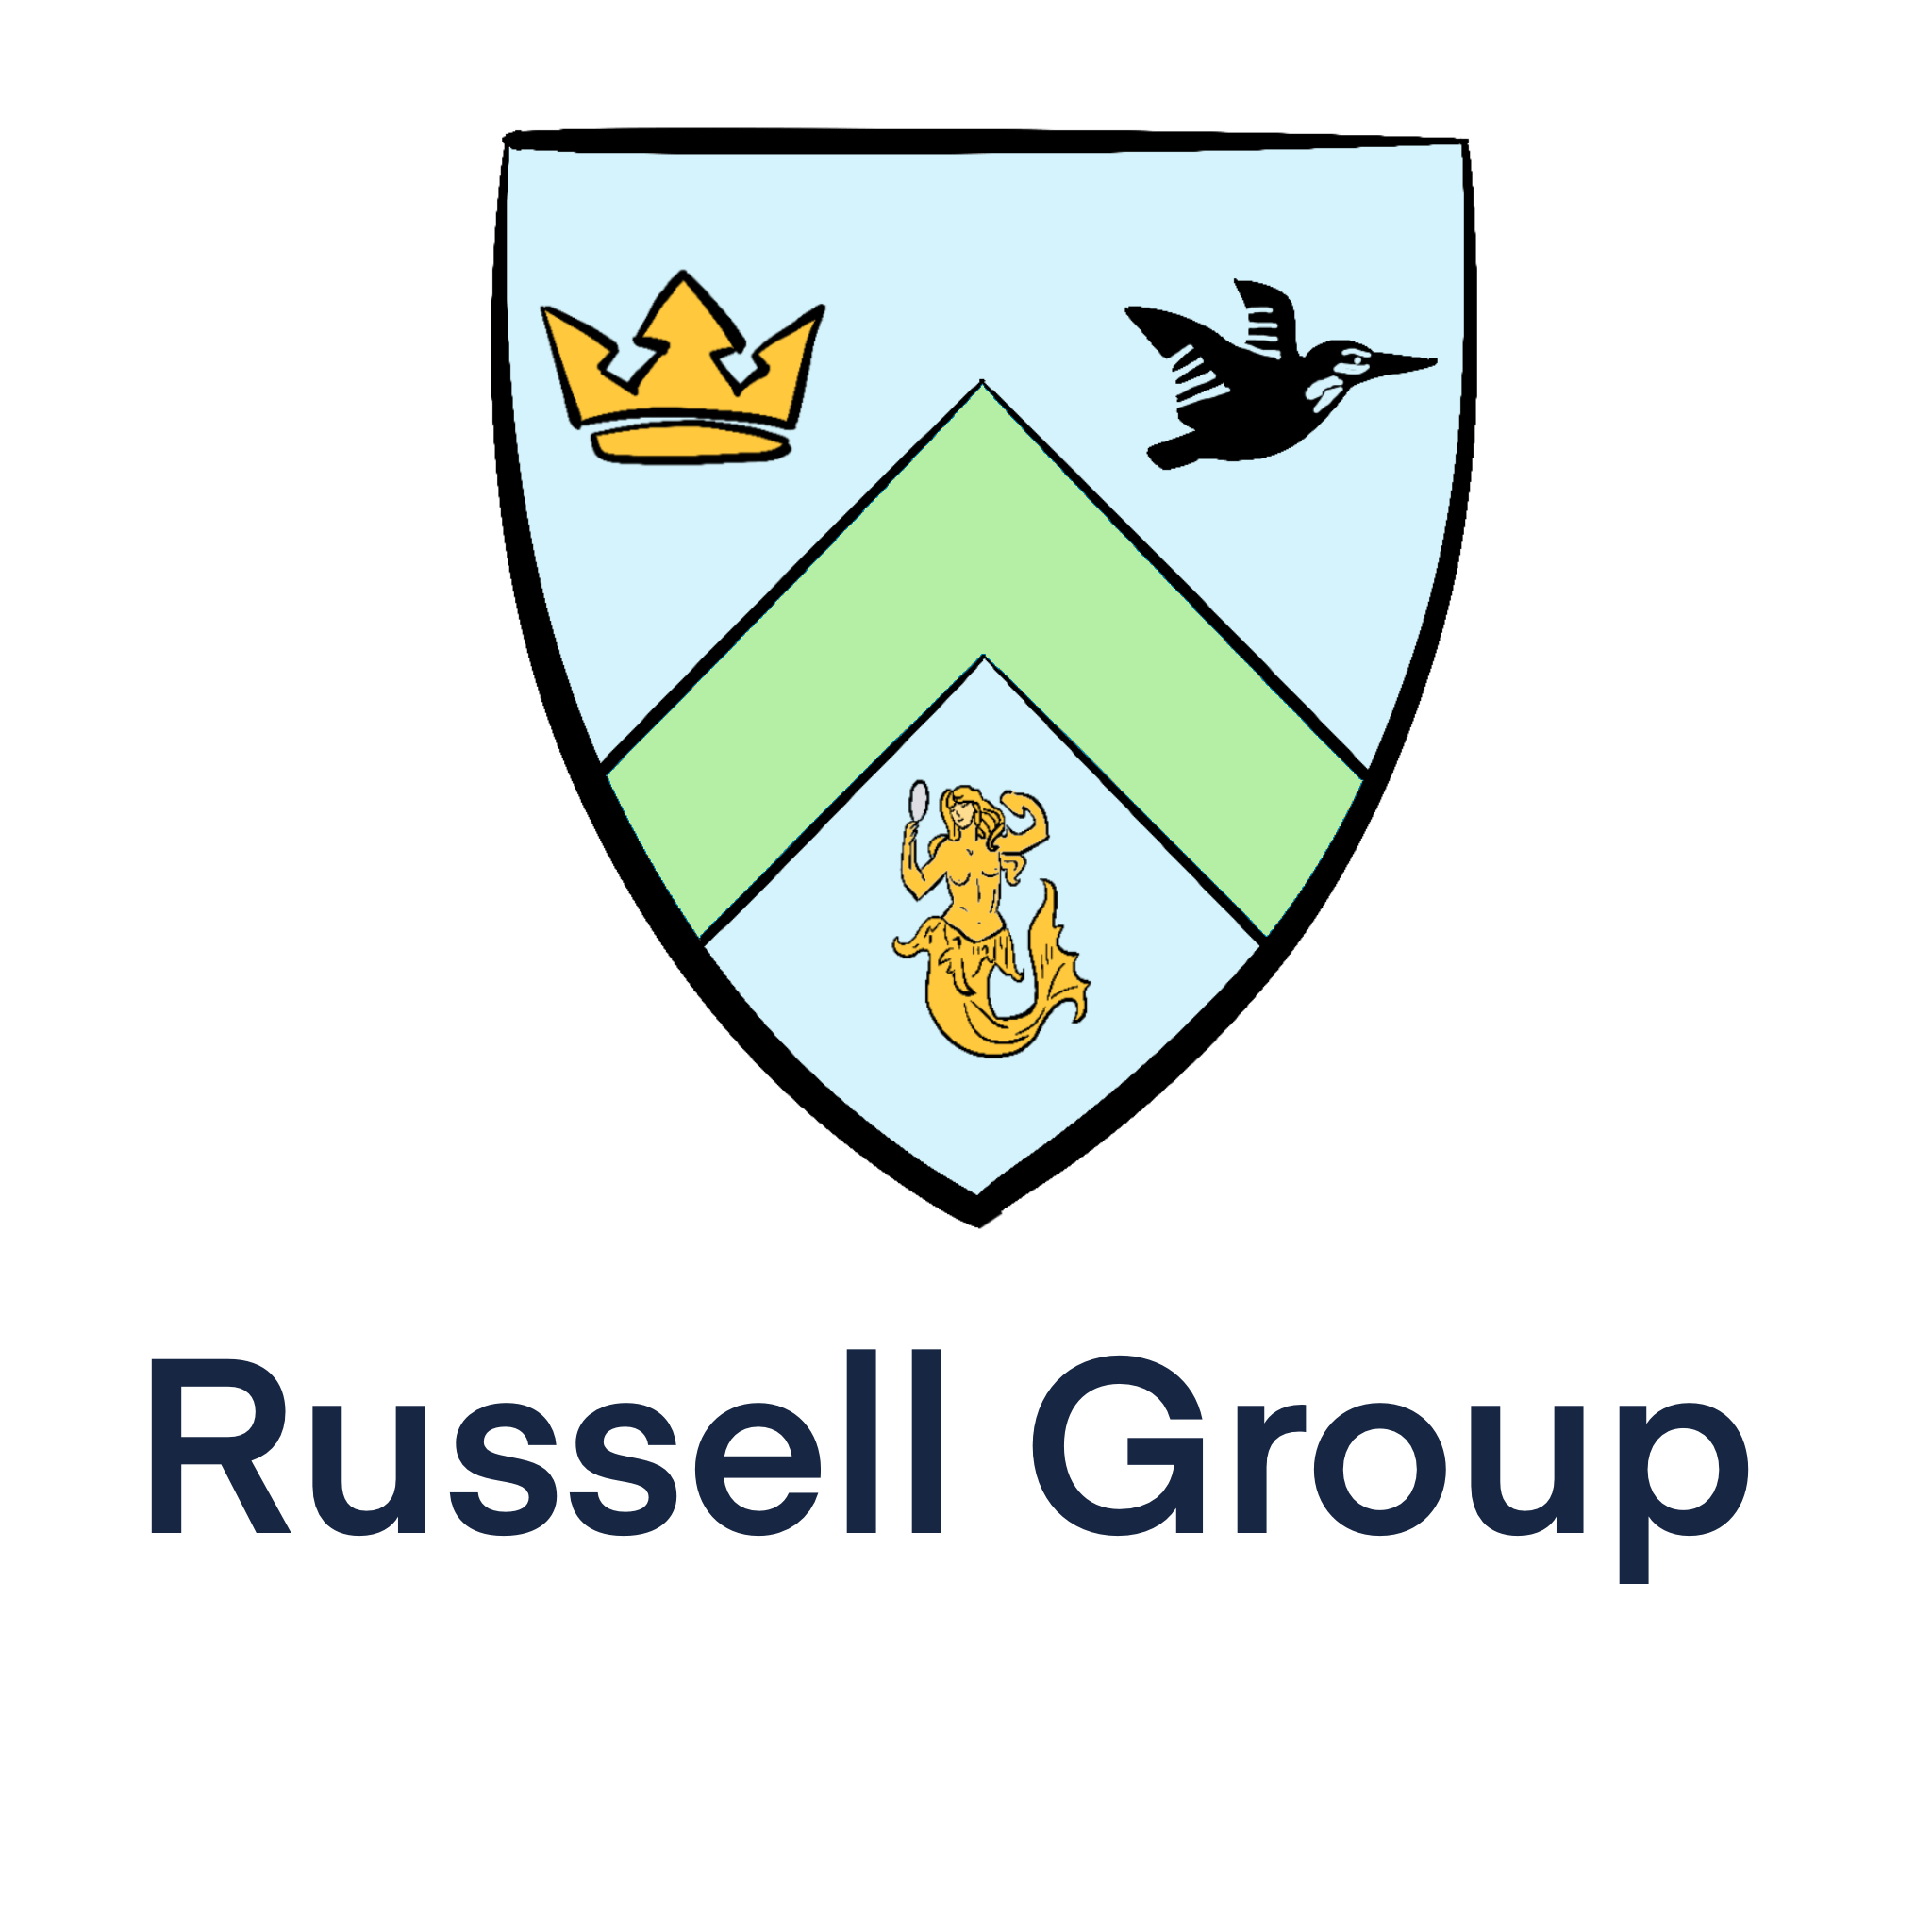 Leif holds a degree from a Russell Group University